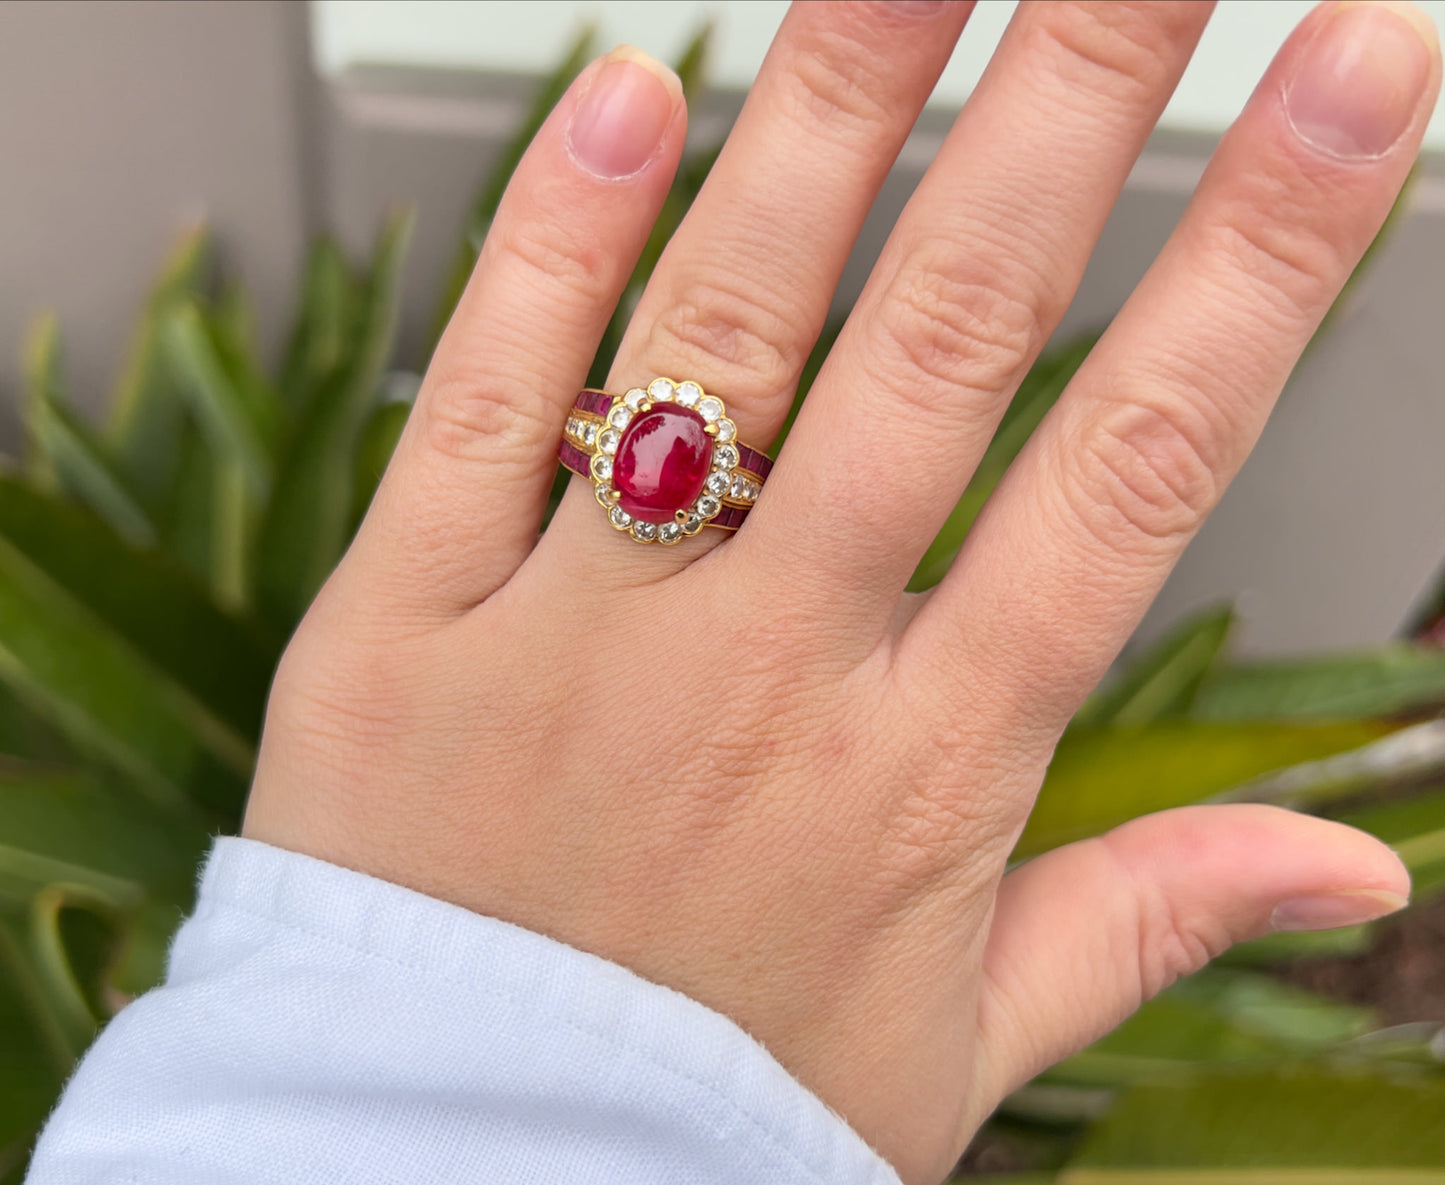 Cabochon 4.40 Carat Red Spinel Ring With Diamonds And Rubies 18K Yellow Gold